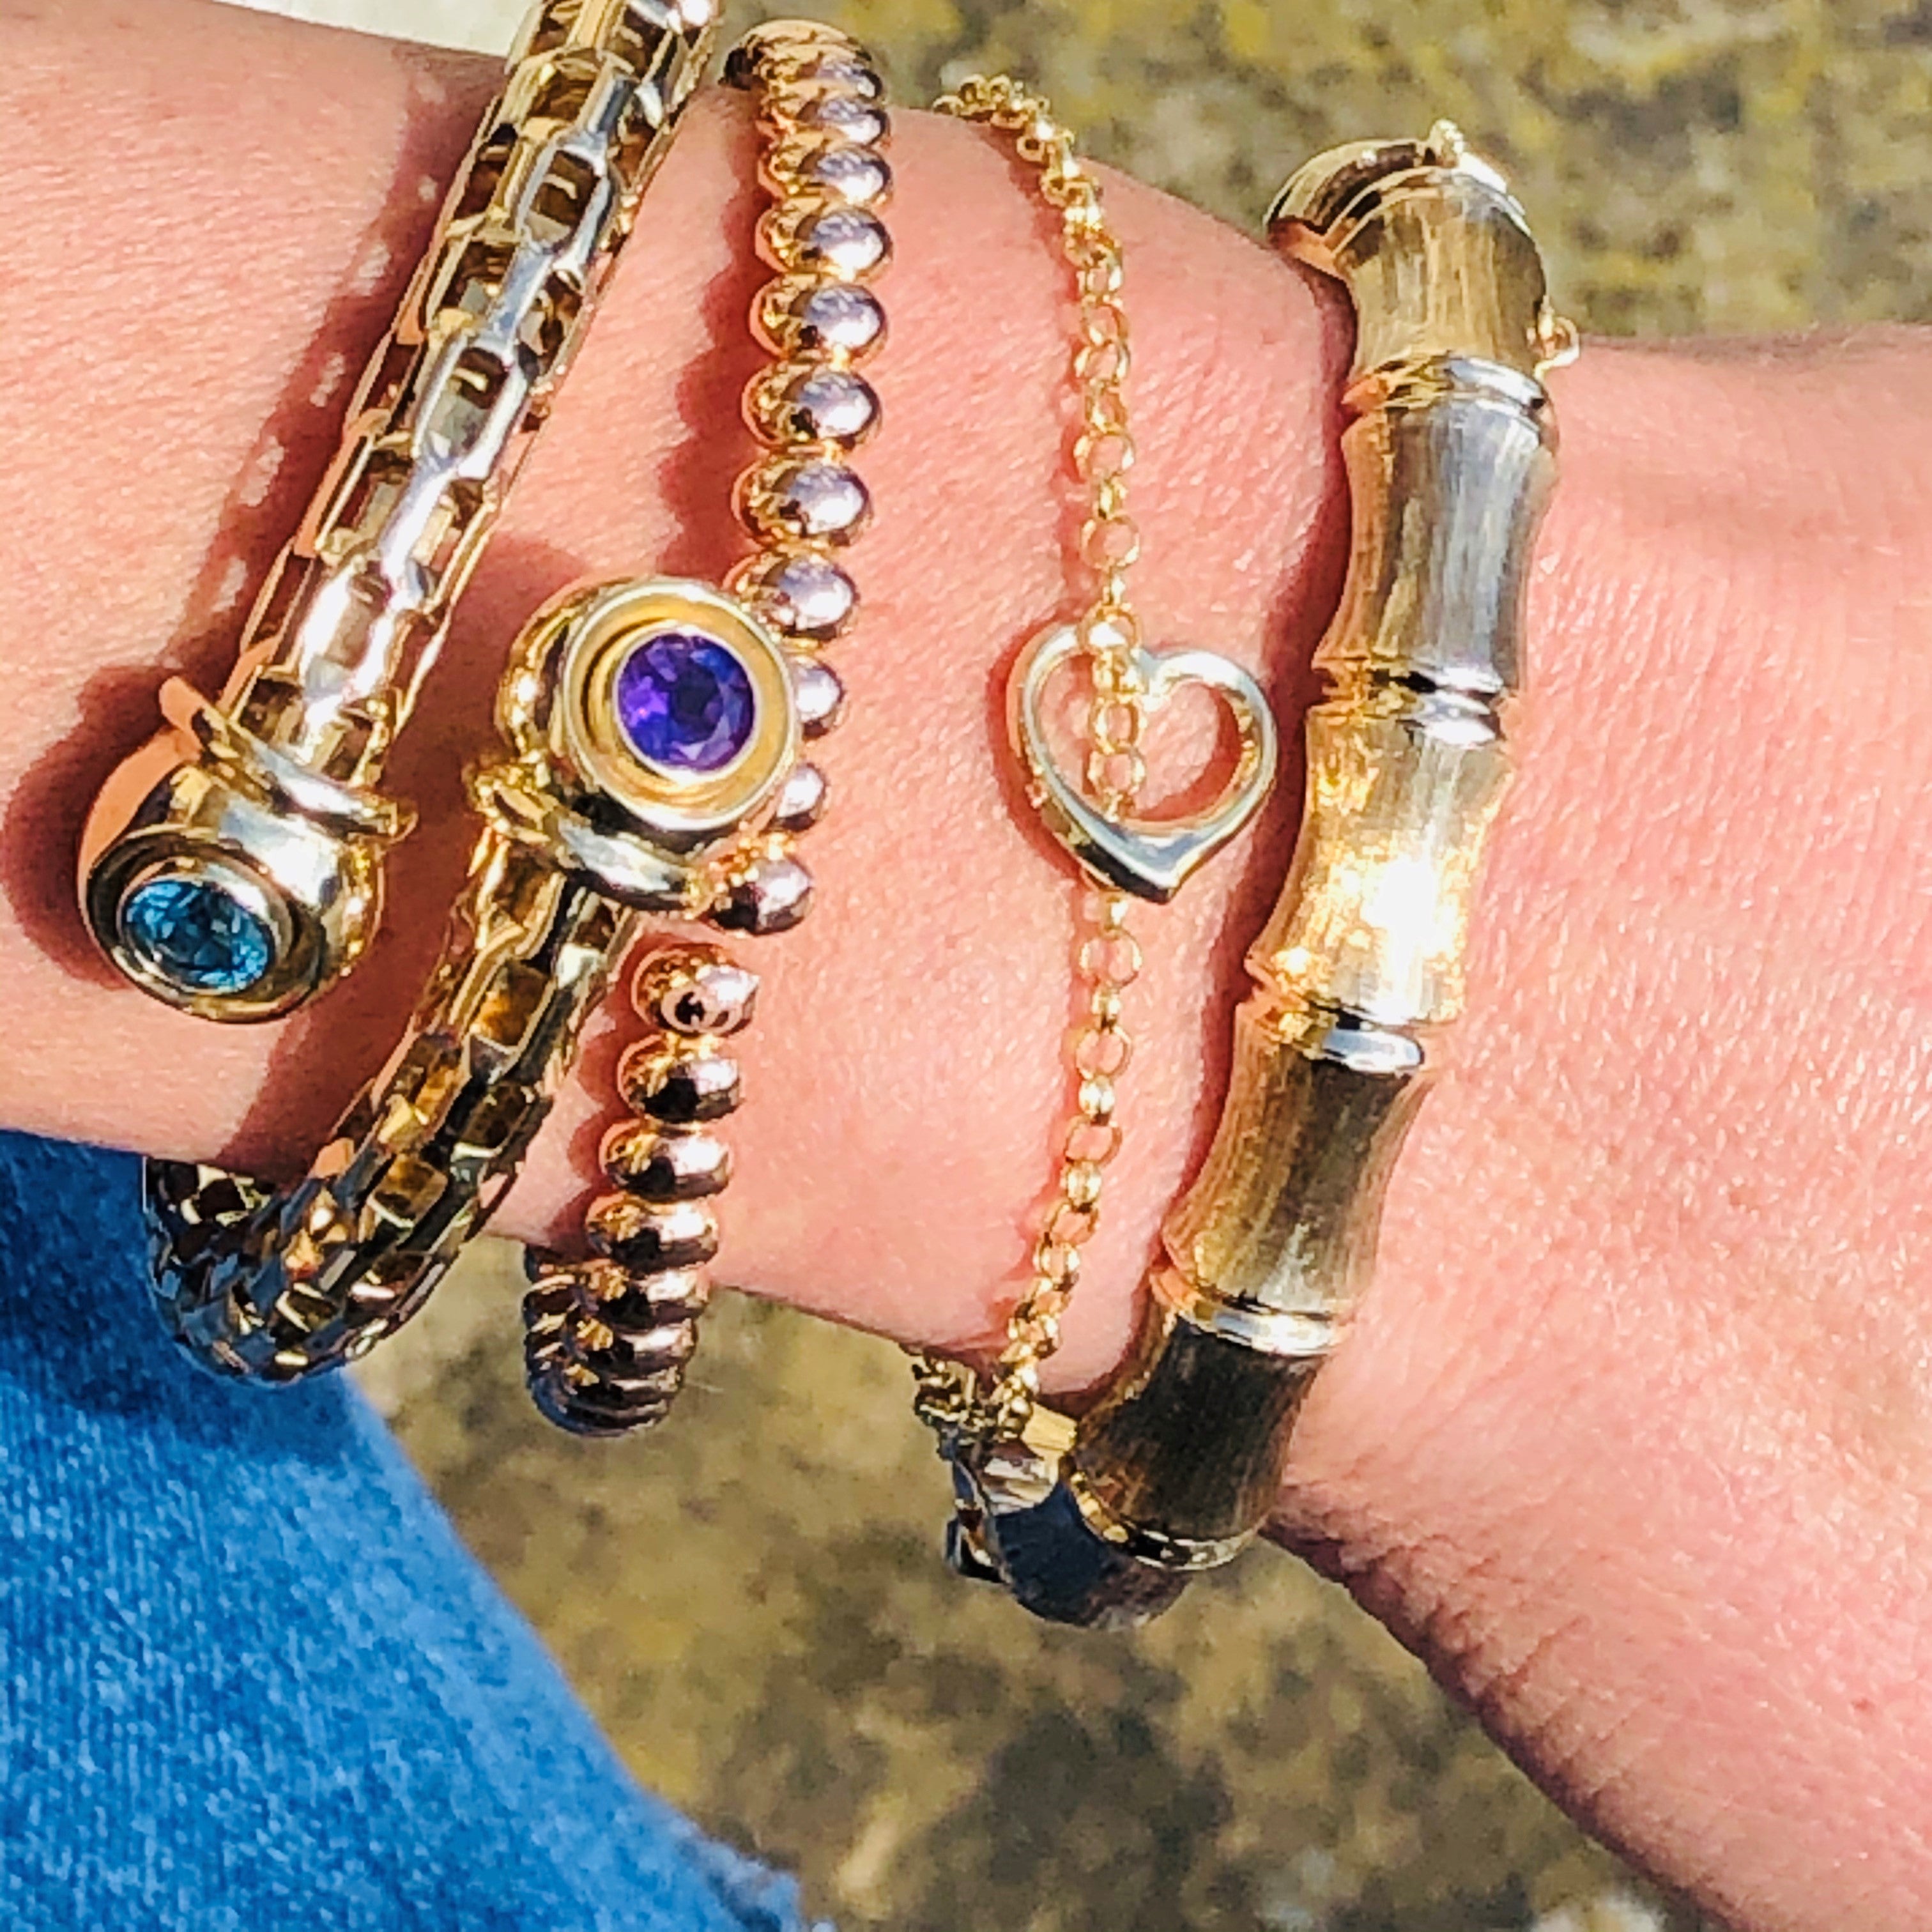 Alluring Amethyst & Topaz Torque Bangle photographed with other bangles on a models wrist